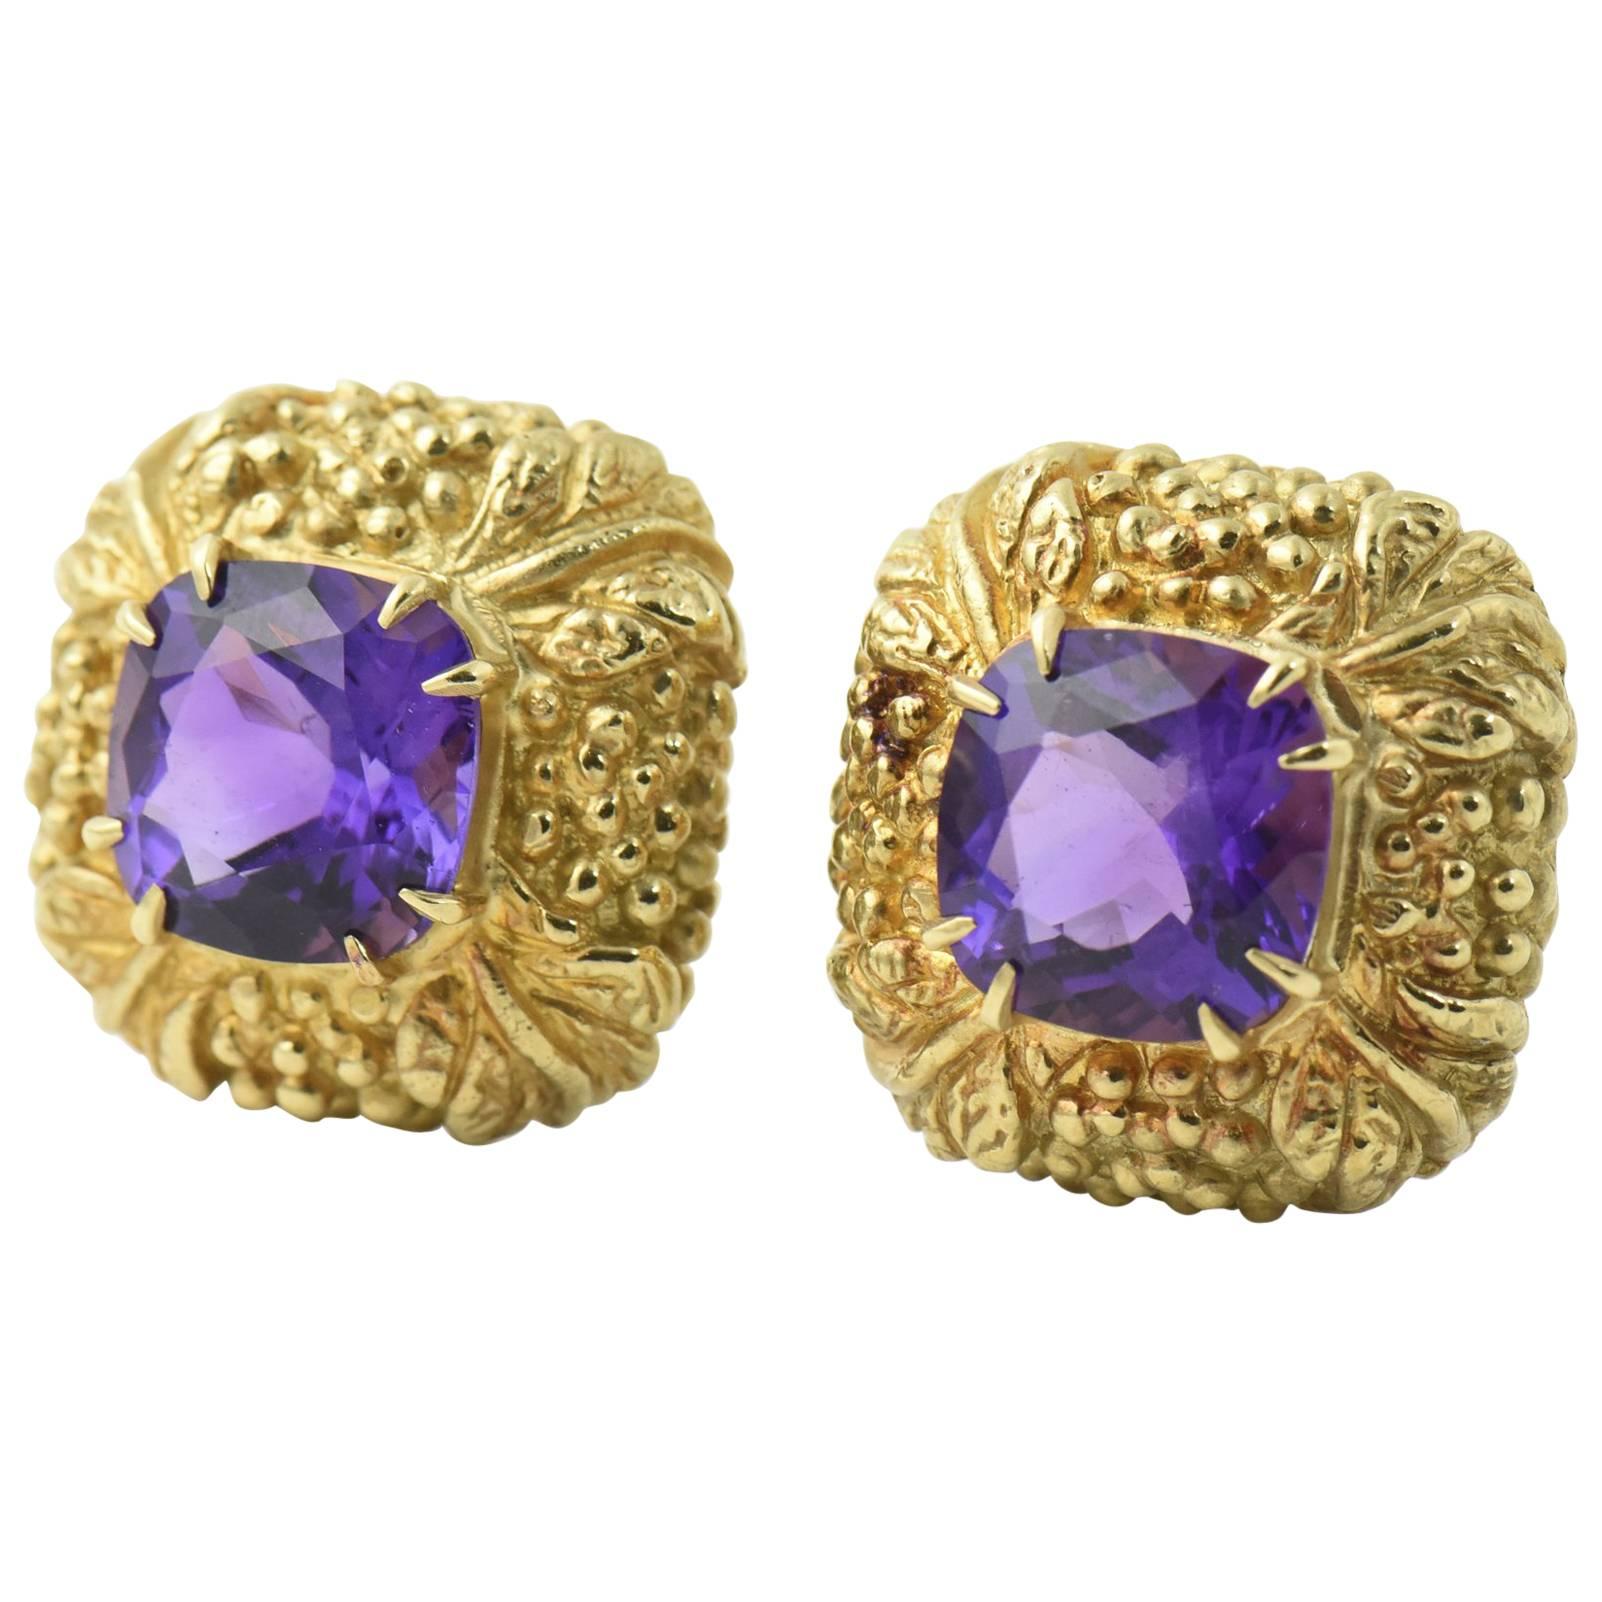 Highly Stylized Amethyst Gold Square Earclips Earrings